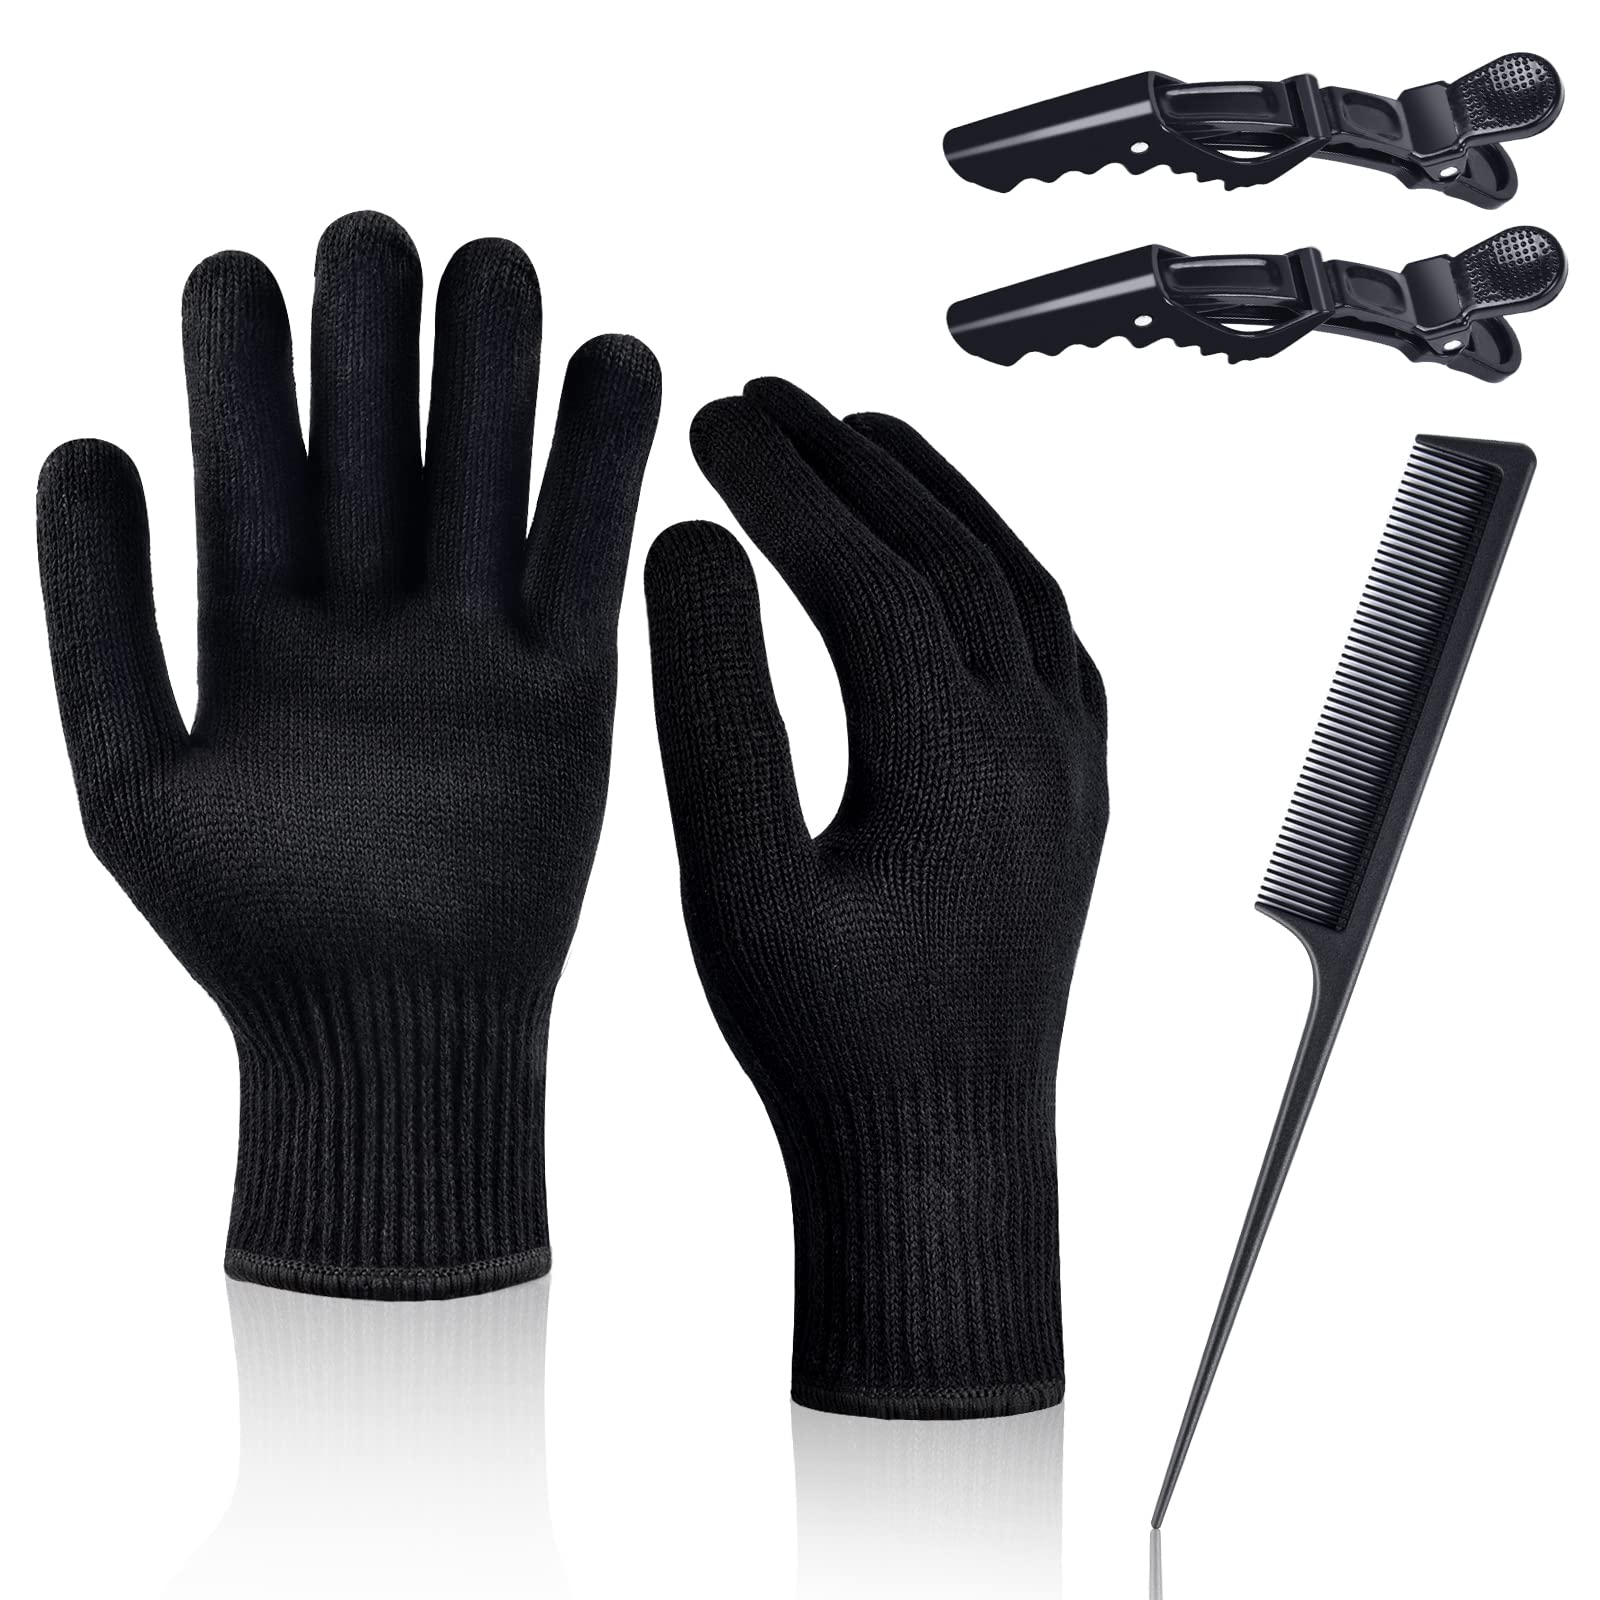 Heat Gloves for Hair Styling, IKOCO 2Pcs Curling Iron Gloves Heat Proof  Glove Mitts for Hair Styling Flat Iron and Curling Wand Hot-Air Brushes